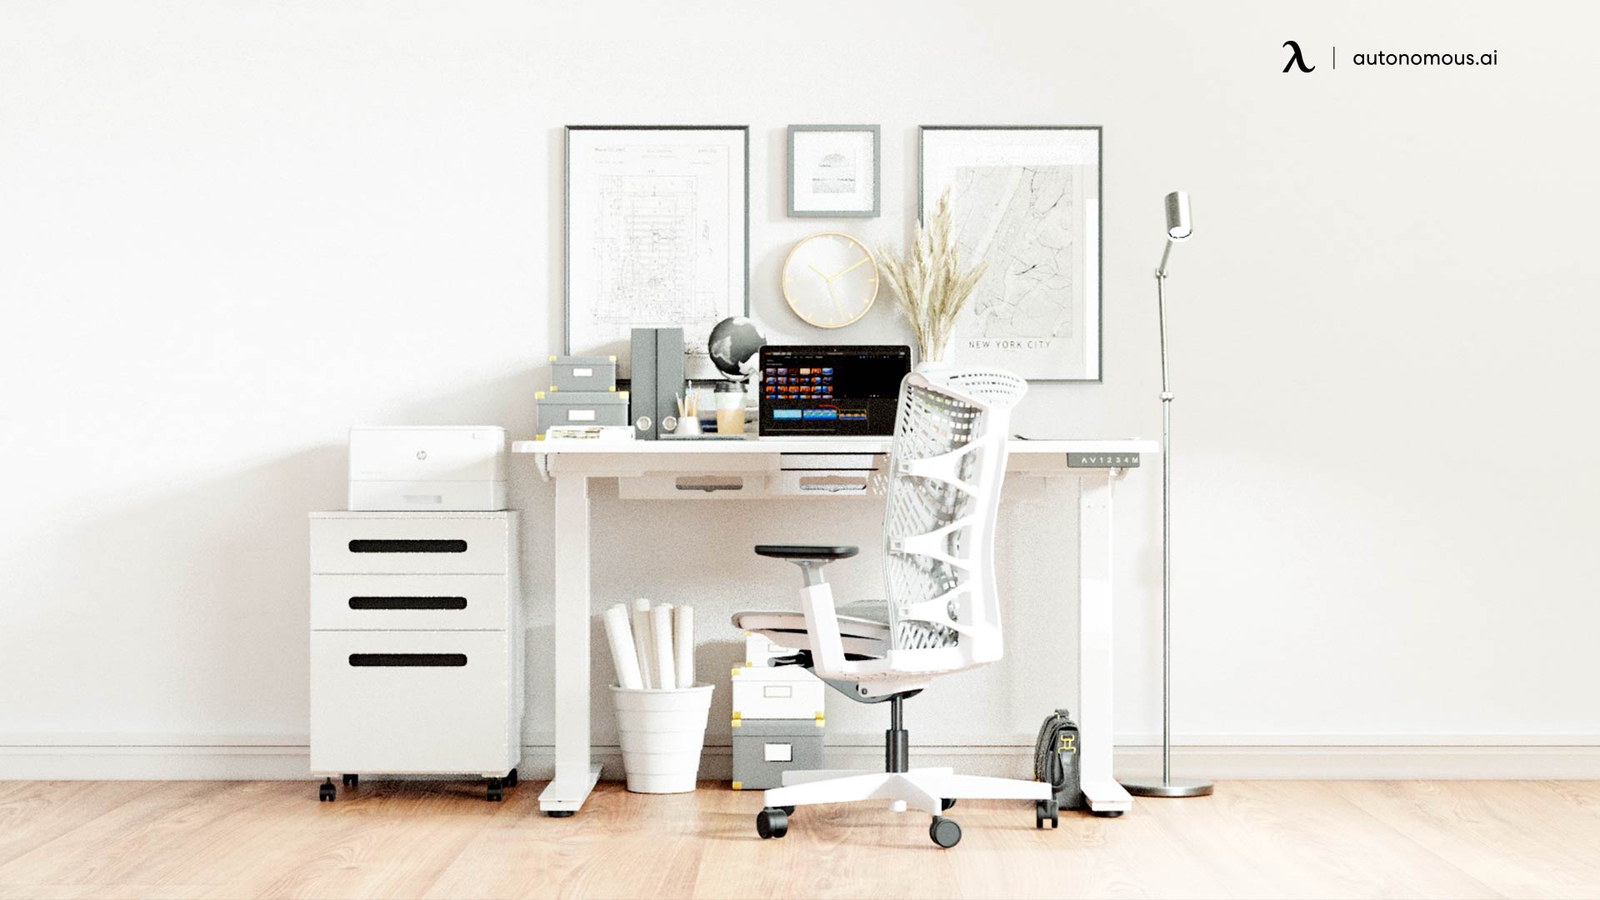 Buying Desk Legs: Where Can I Get Ones?